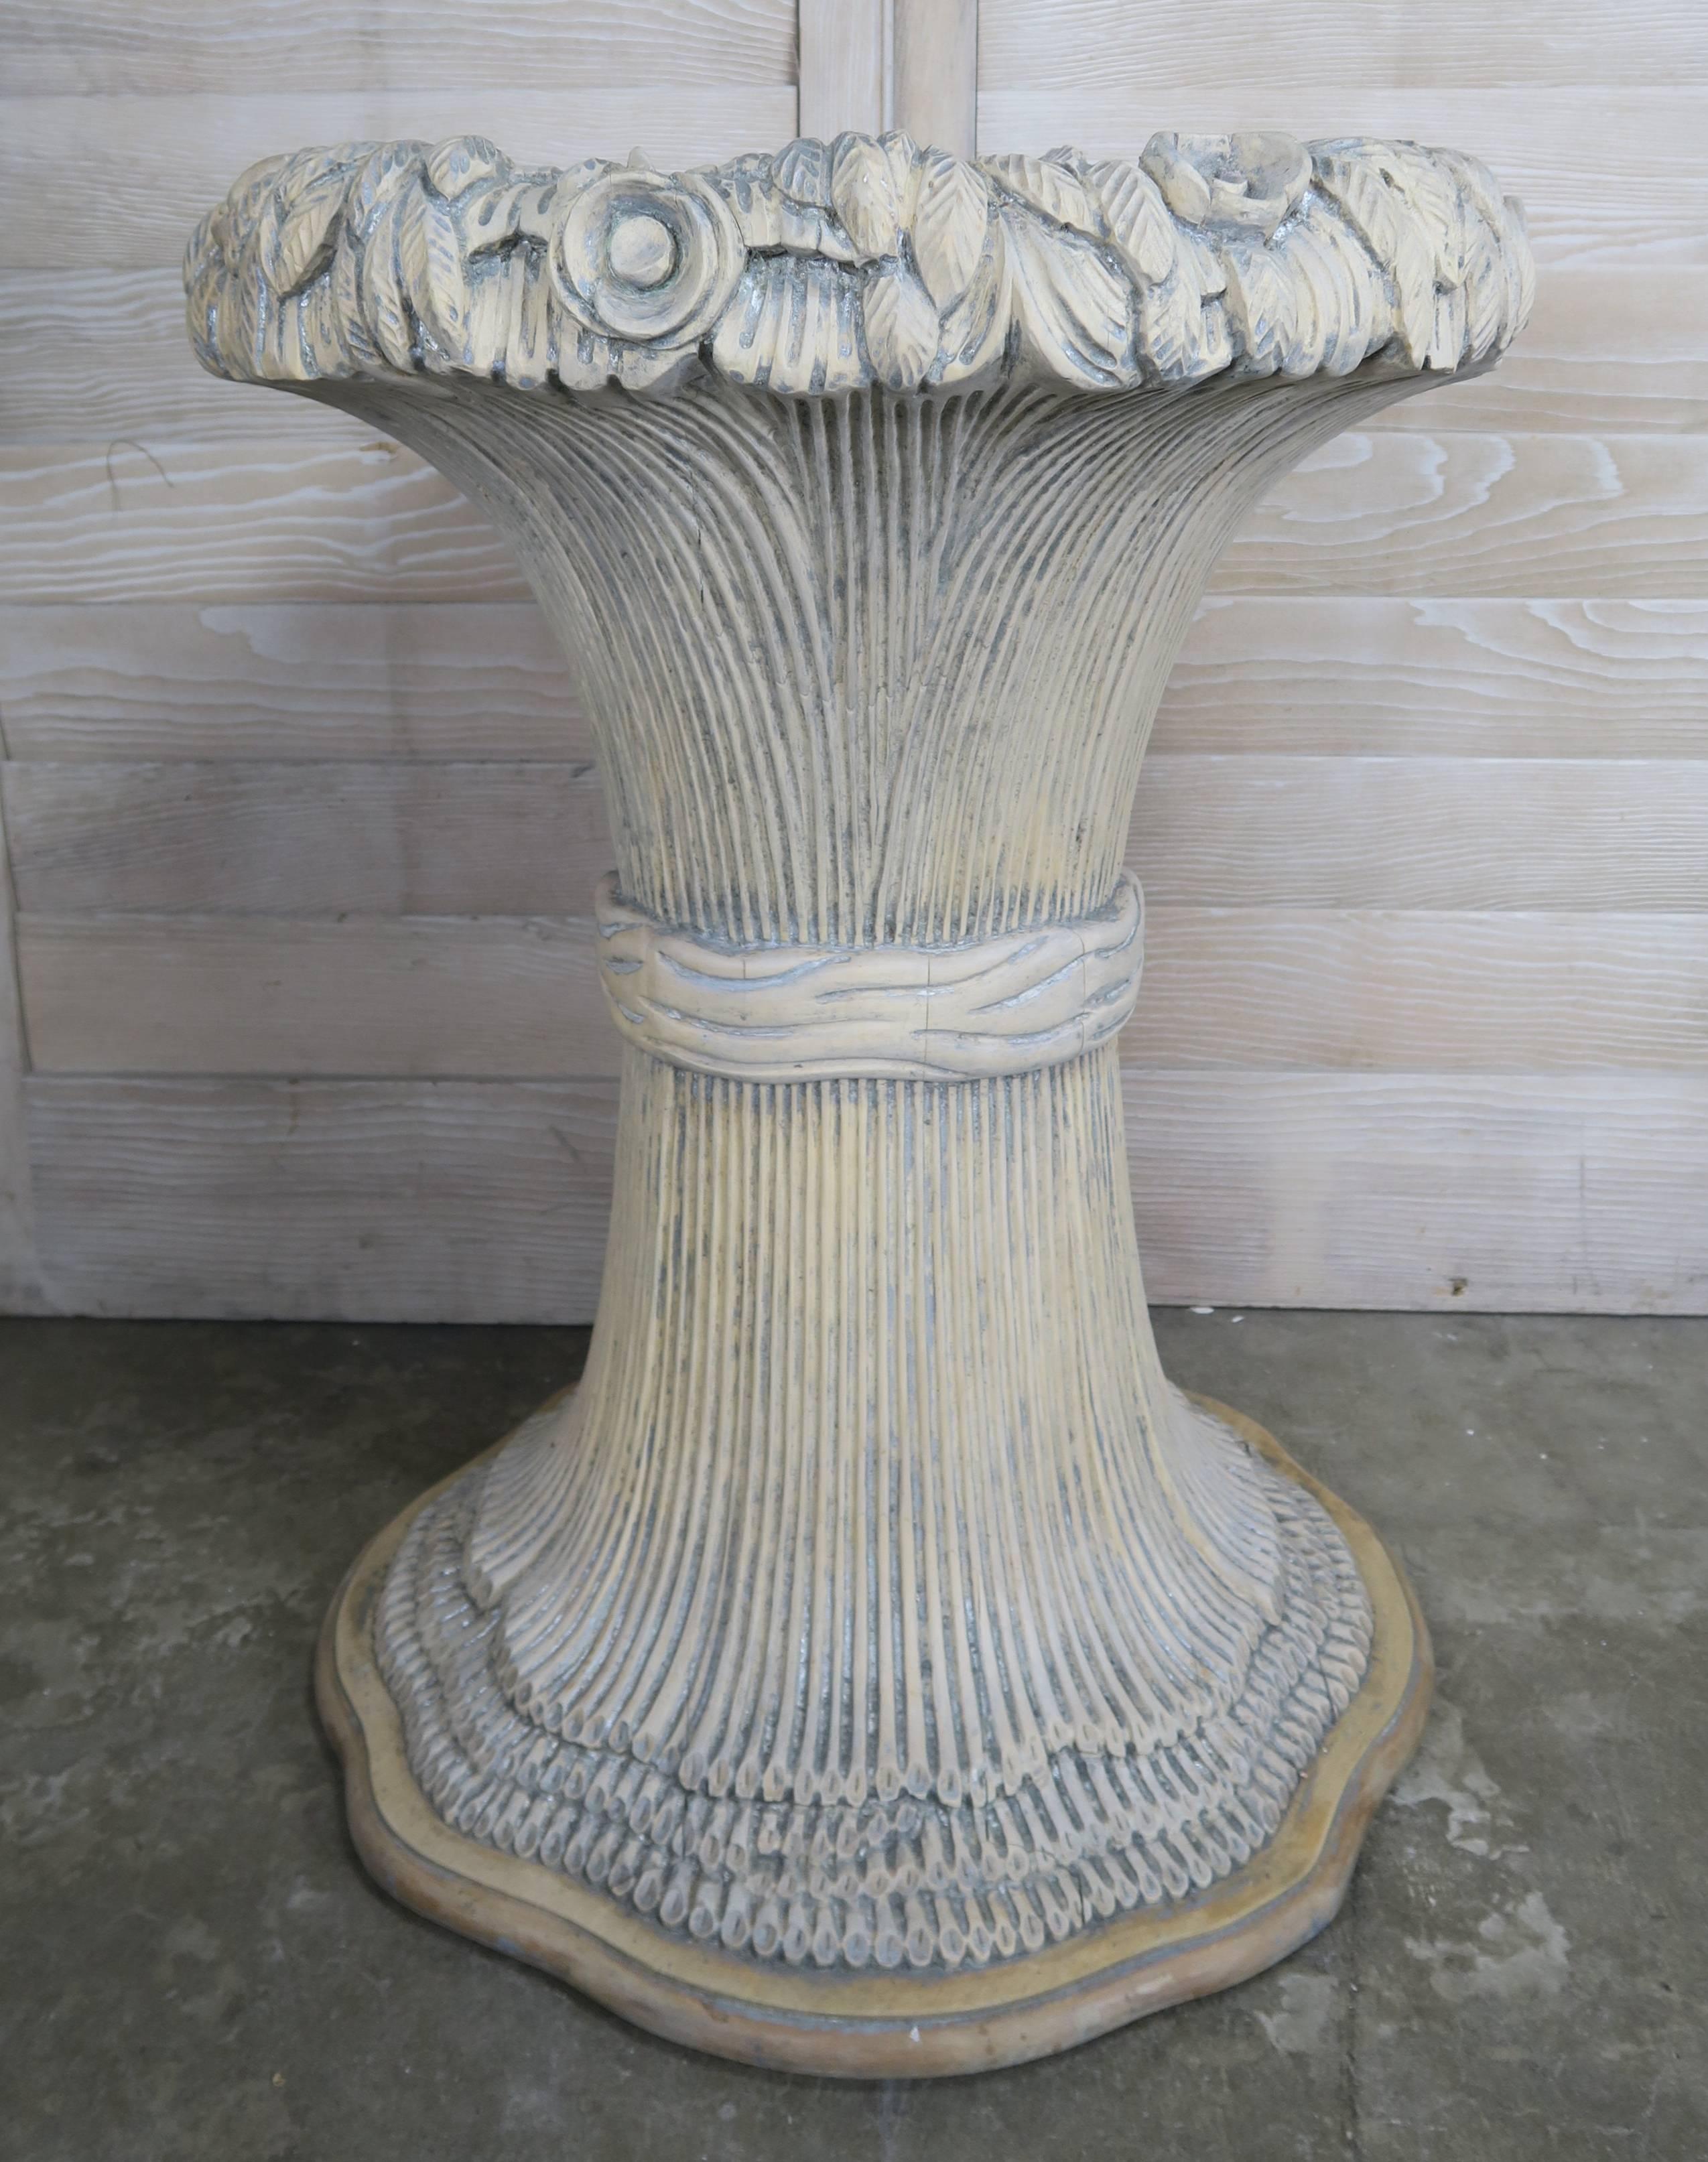 Pair of French painted carved wood planters that are designed as large bunches of wheat. Imagine them filled with beautiful floral arrangements. THIS IS FOR THE PAIR, not a single.